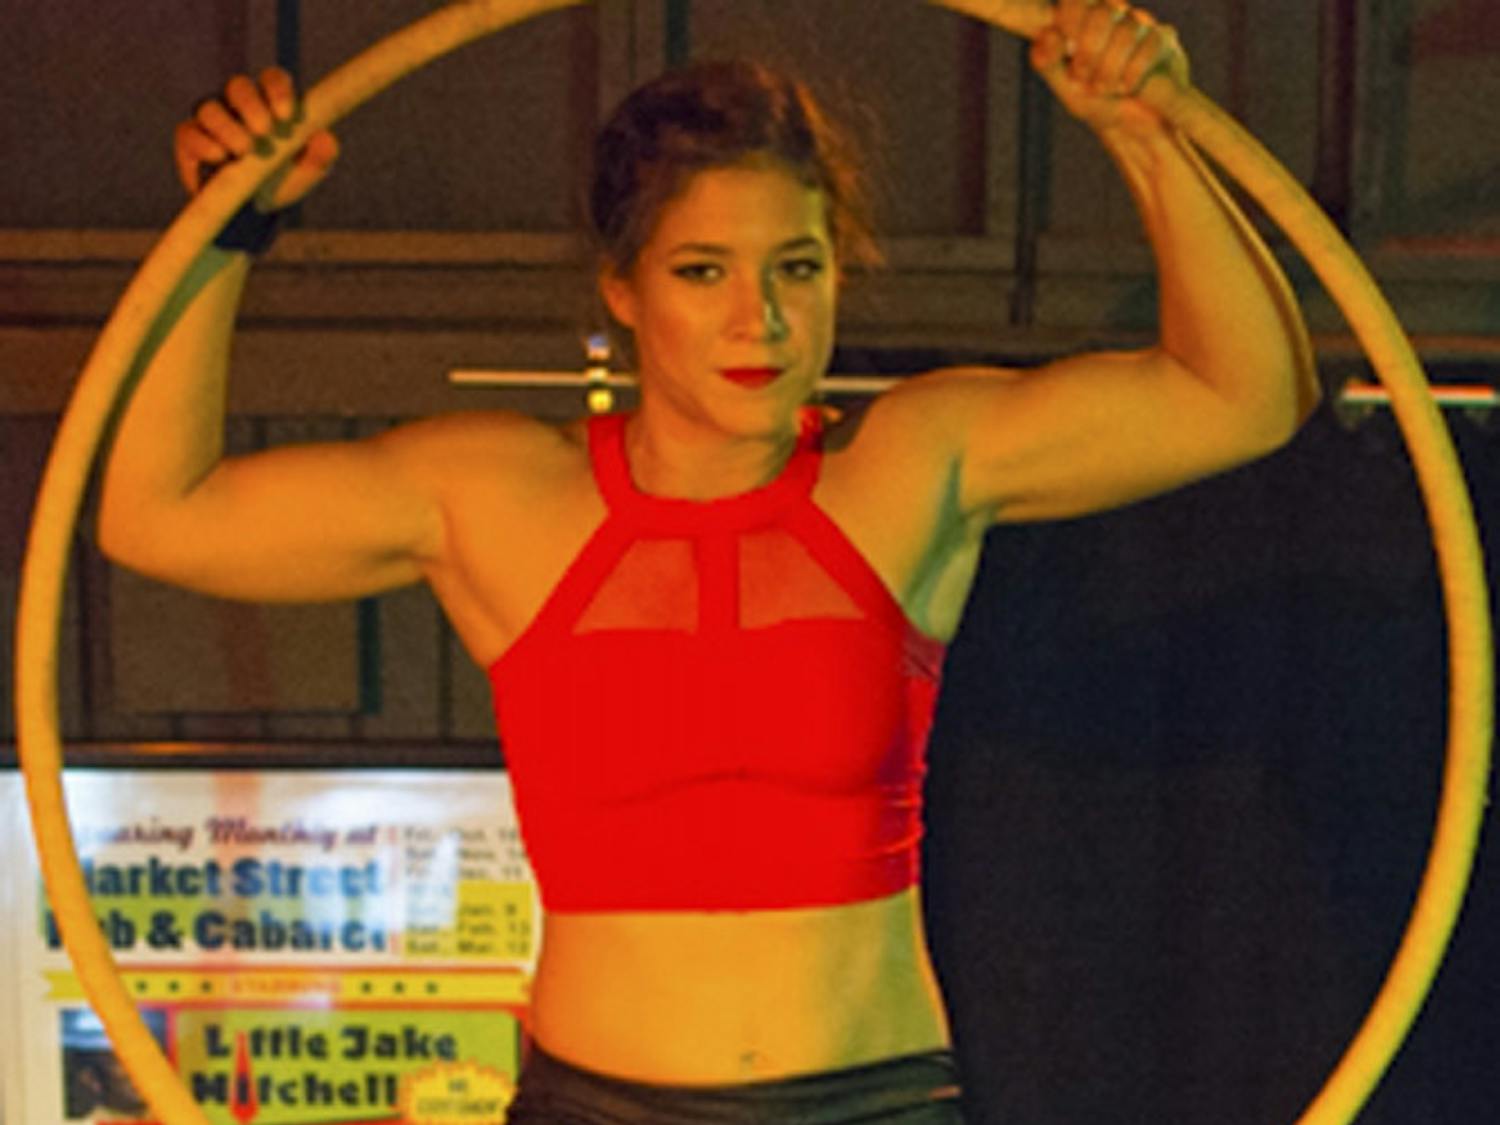 Kelly Ulmer, a 25-year-old AscenDance aerialist mental health counselor, swings from a lyra at Market Street Pub and Cabaret. Ulmer said she got bored with yoga and tried out an aerial arts class at S-Connection Aerial Arts, which started her love for the craft.